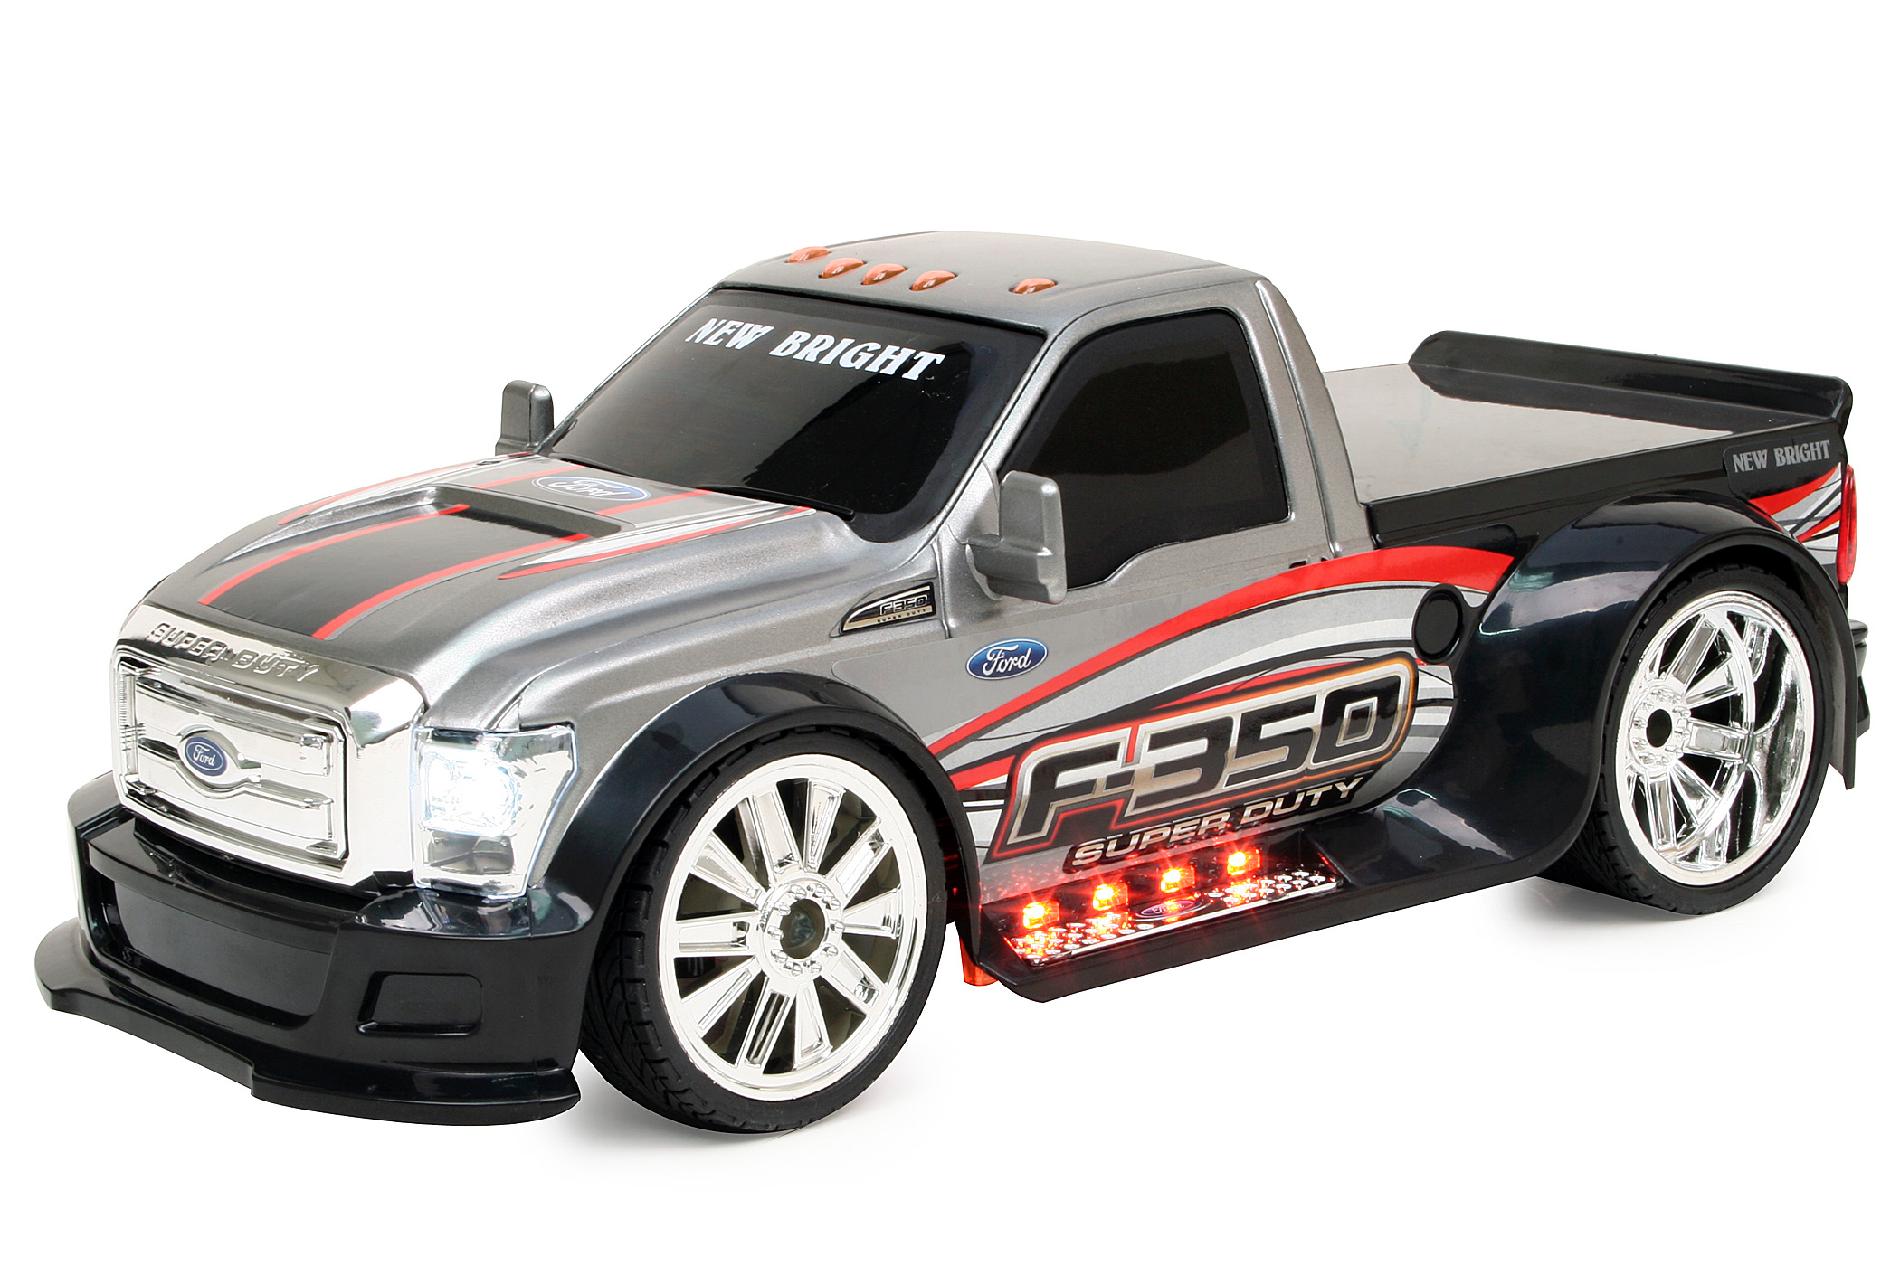 1:16 Scale Ford F-350 Super duty with Lights